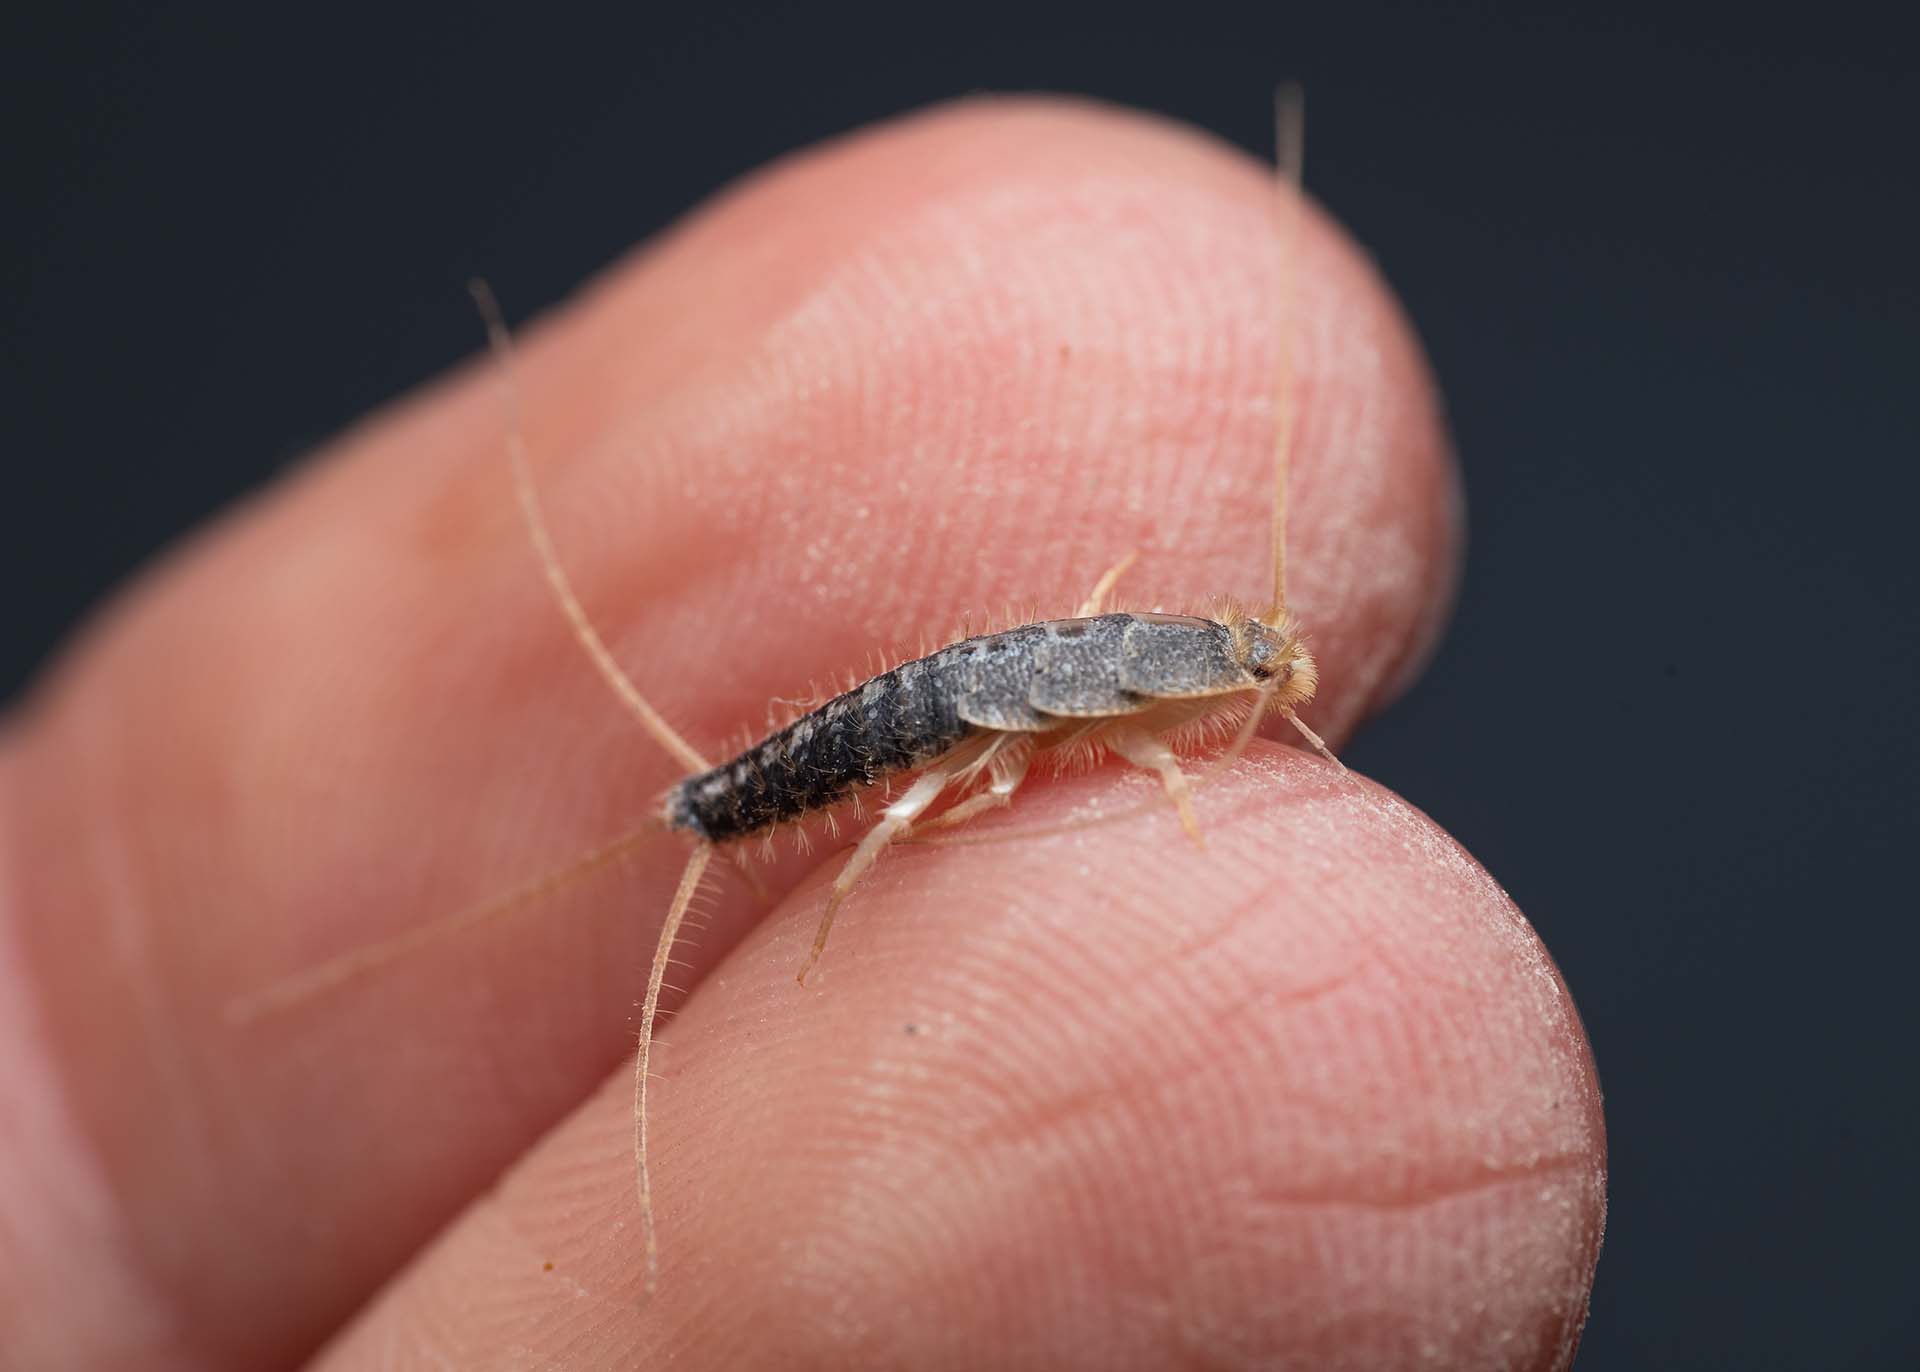 What Are Silverfish? Picture includes a close up of an adult silverfish on human fingers for scale